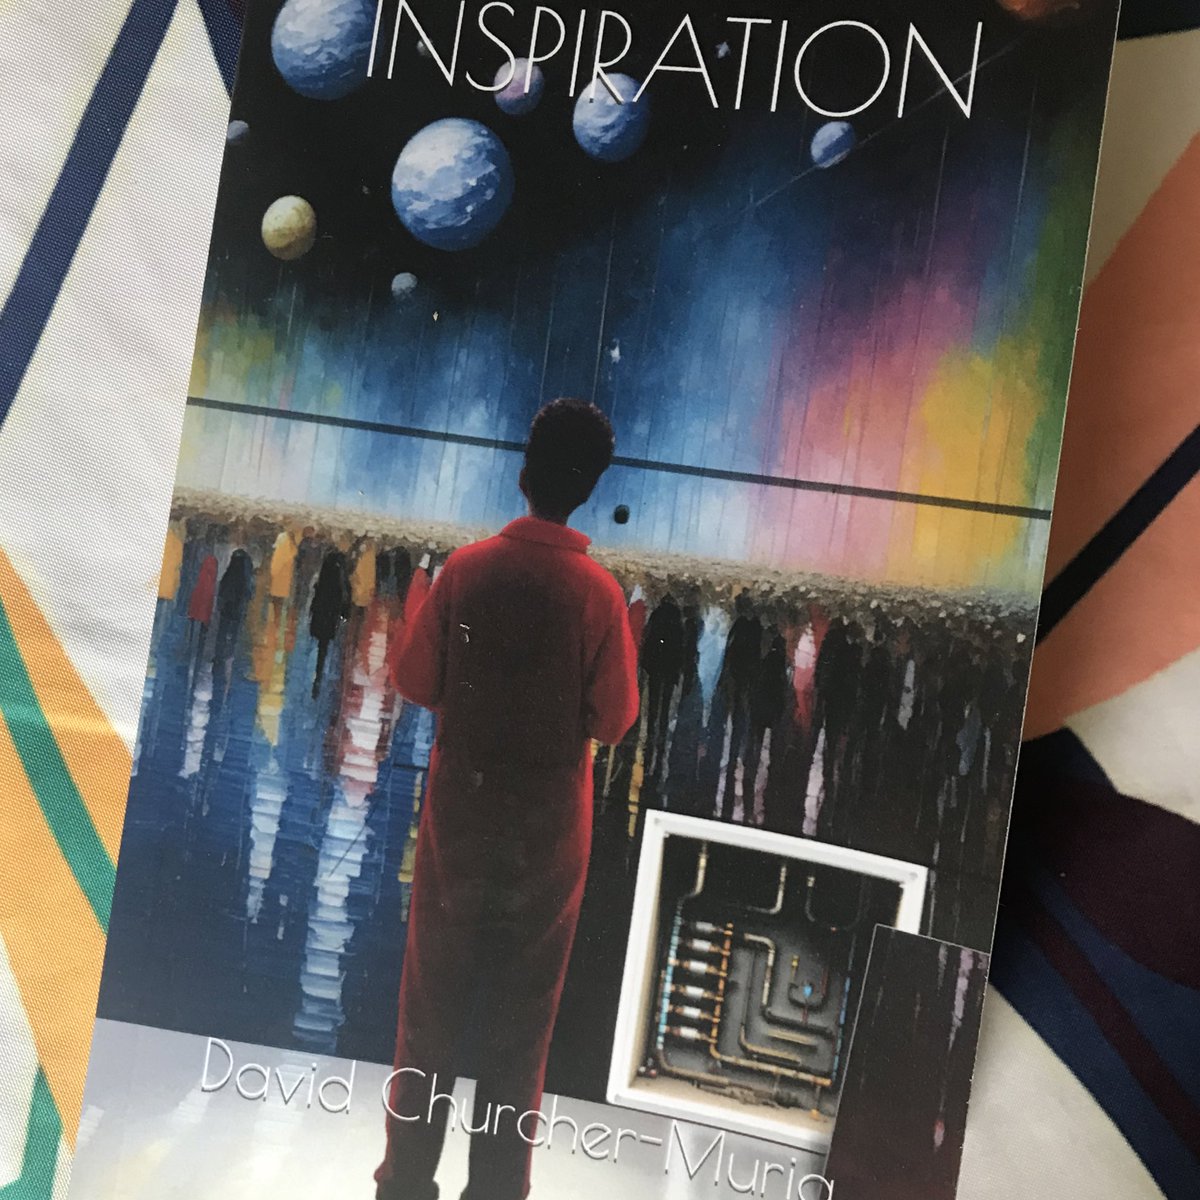 Finally, proudly delivered on its own ready for an @sfbook review is @Dacedrgn’s ‘Inspiration’.

Available to buy right now.

4/4